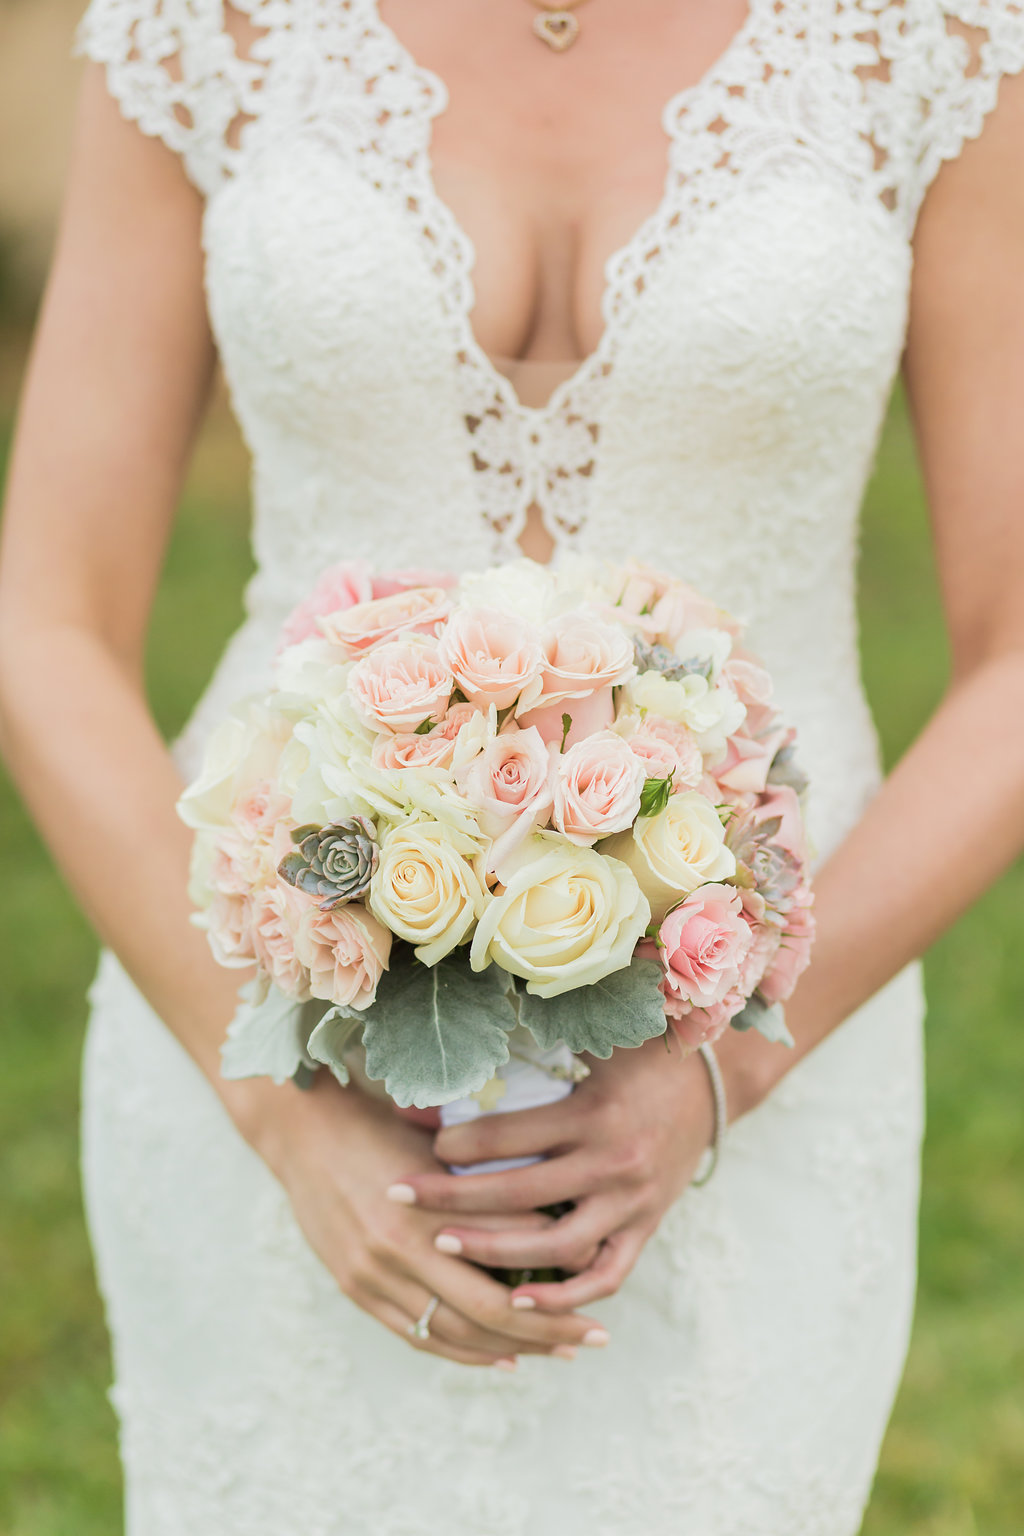 The bride's wedding dress is lace, open back, with beaded spine, lace detailing, lace cap sleeves and a low cut front. She carries a simple rose cluster bouquet with dusty miller